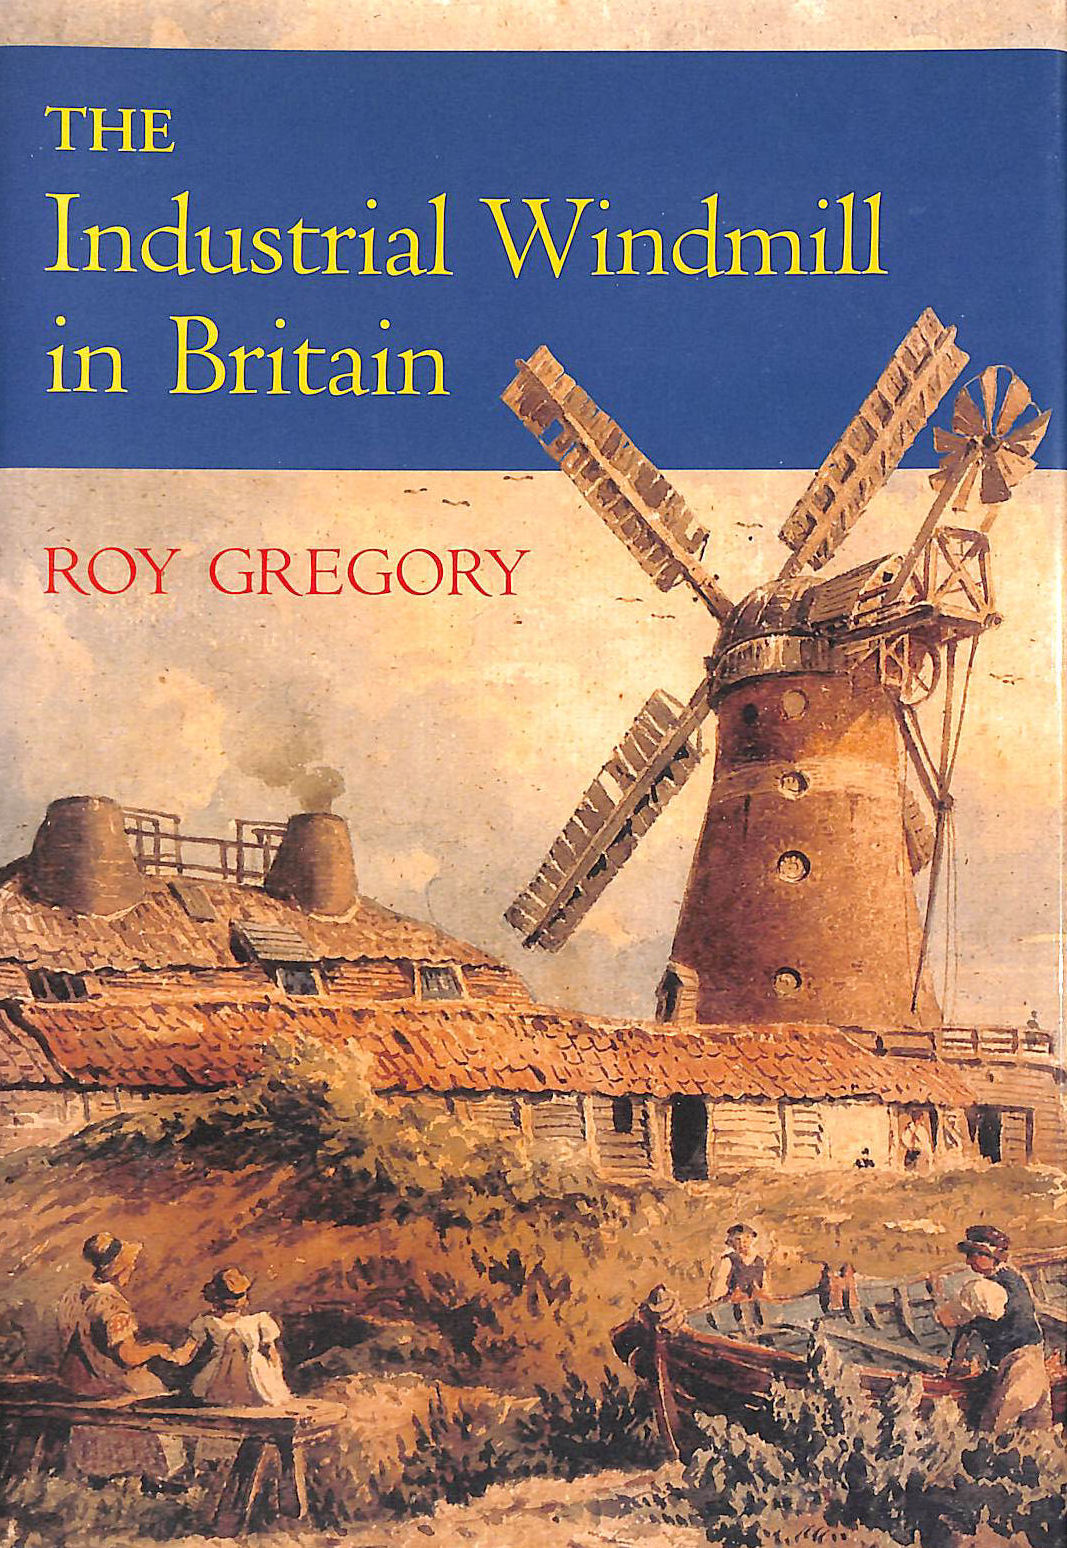 GREGORY, ROY - The Industrial Windmill in Britain